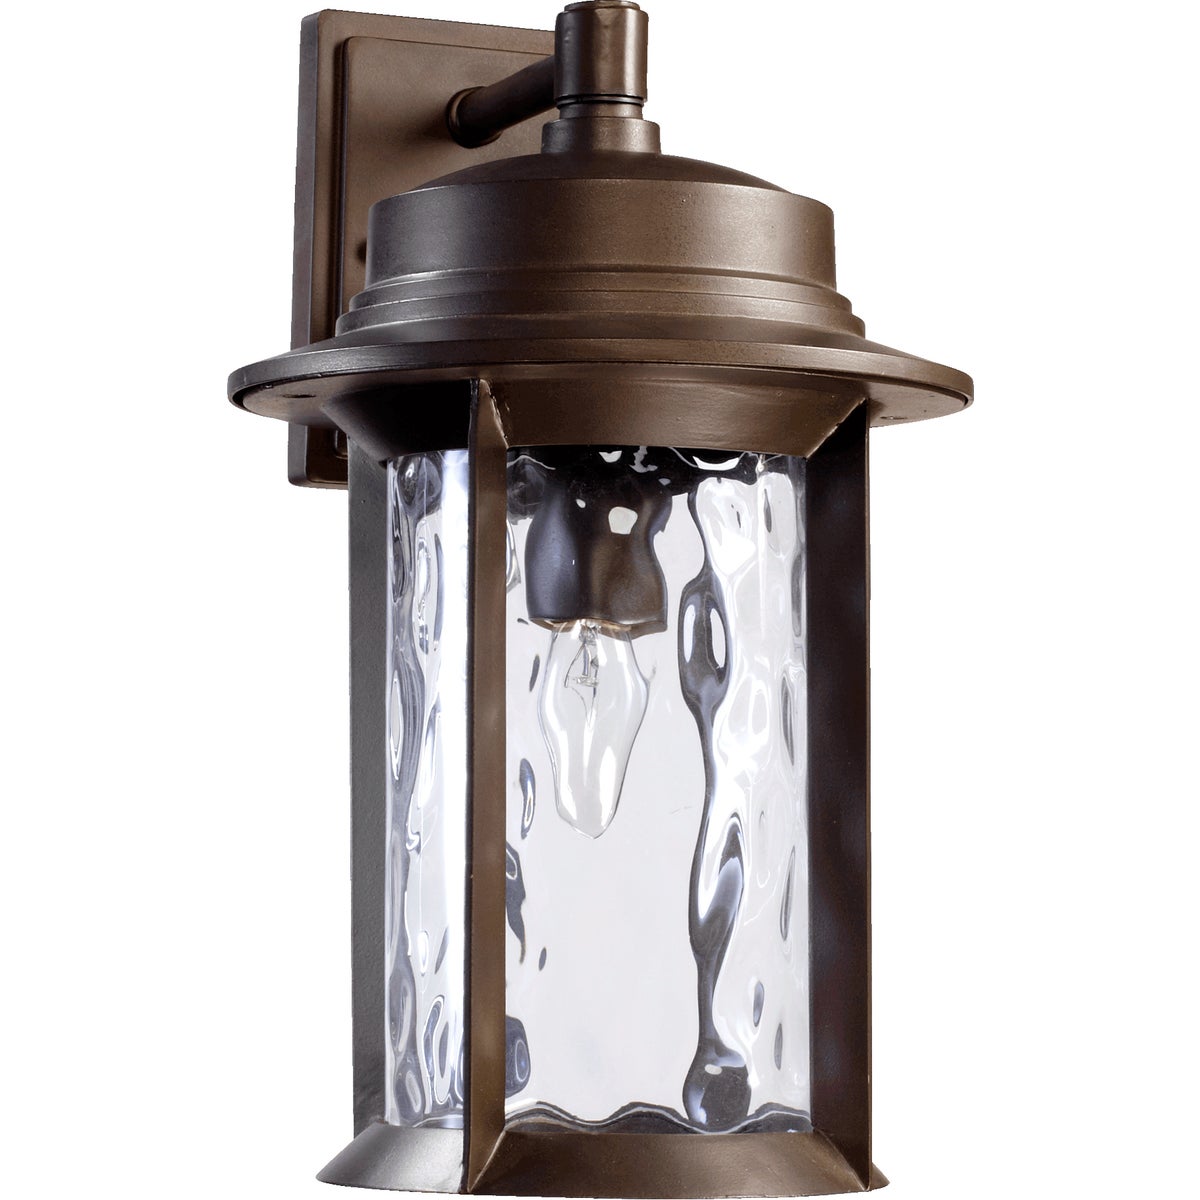 A mid century modern outdoor wall light with a clear glass shade and hammered glass panes. Made from durable metal, it features a clean-lined drum silhouette and a simple backplate. Fits a single dimmable 100W bulb (not included).